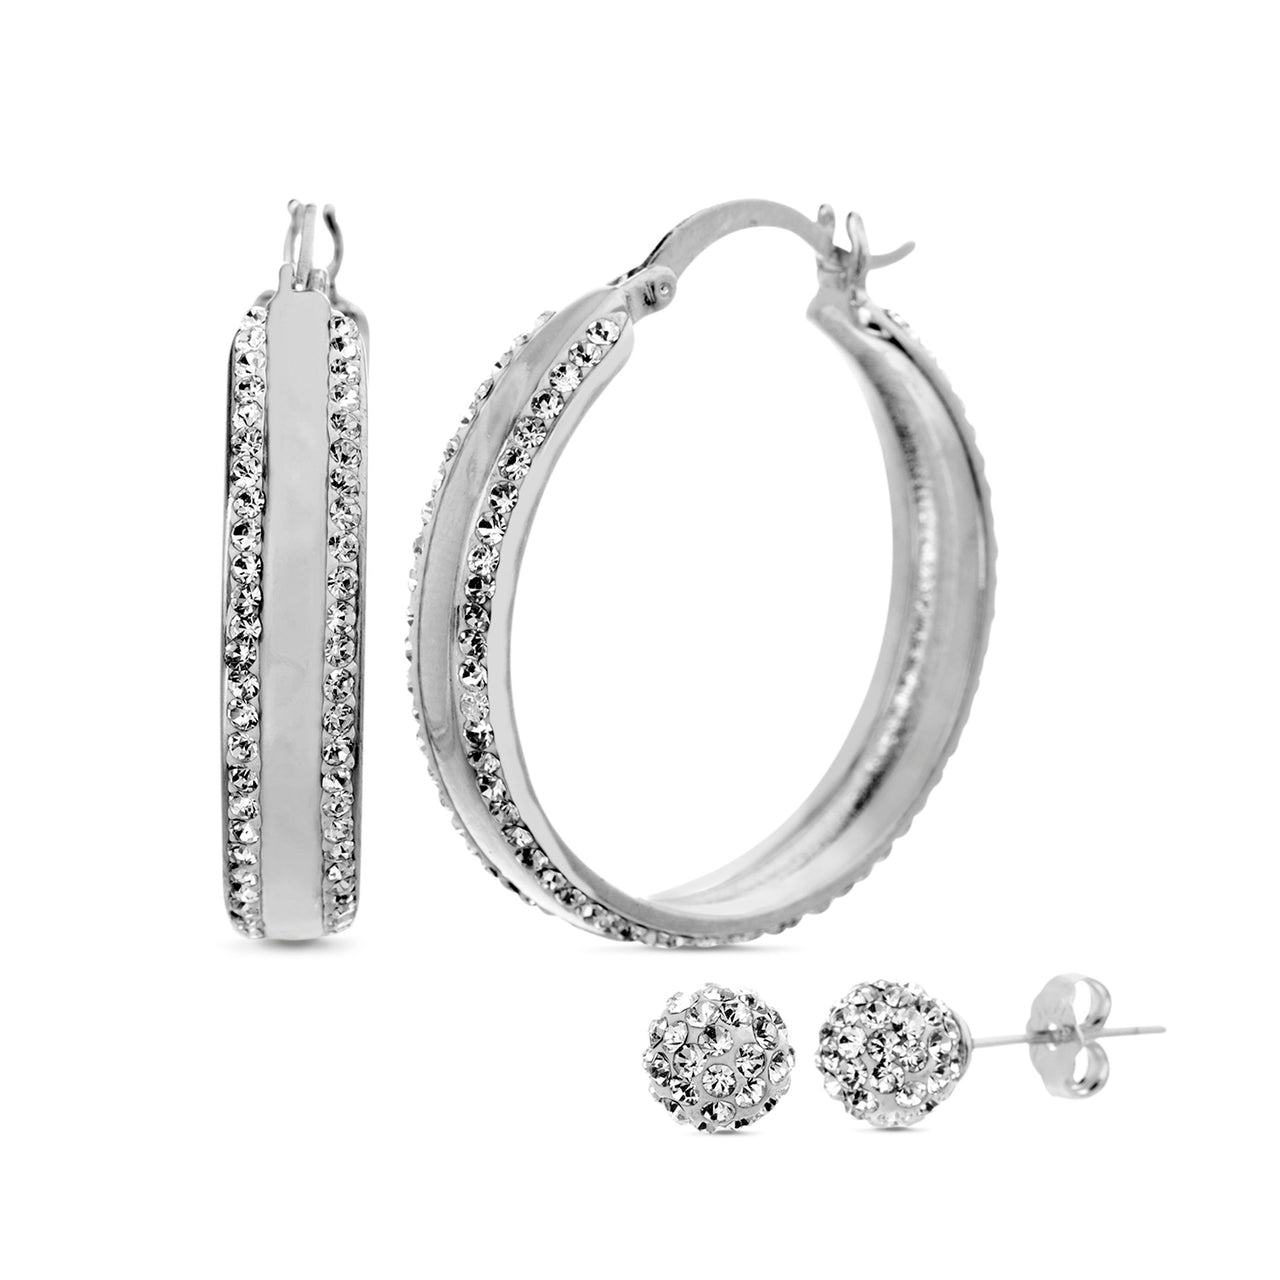 Lesa Michele Crystal Hoops and Ball Stud Earrings 2 Pair Set made with Swarovski Crystals